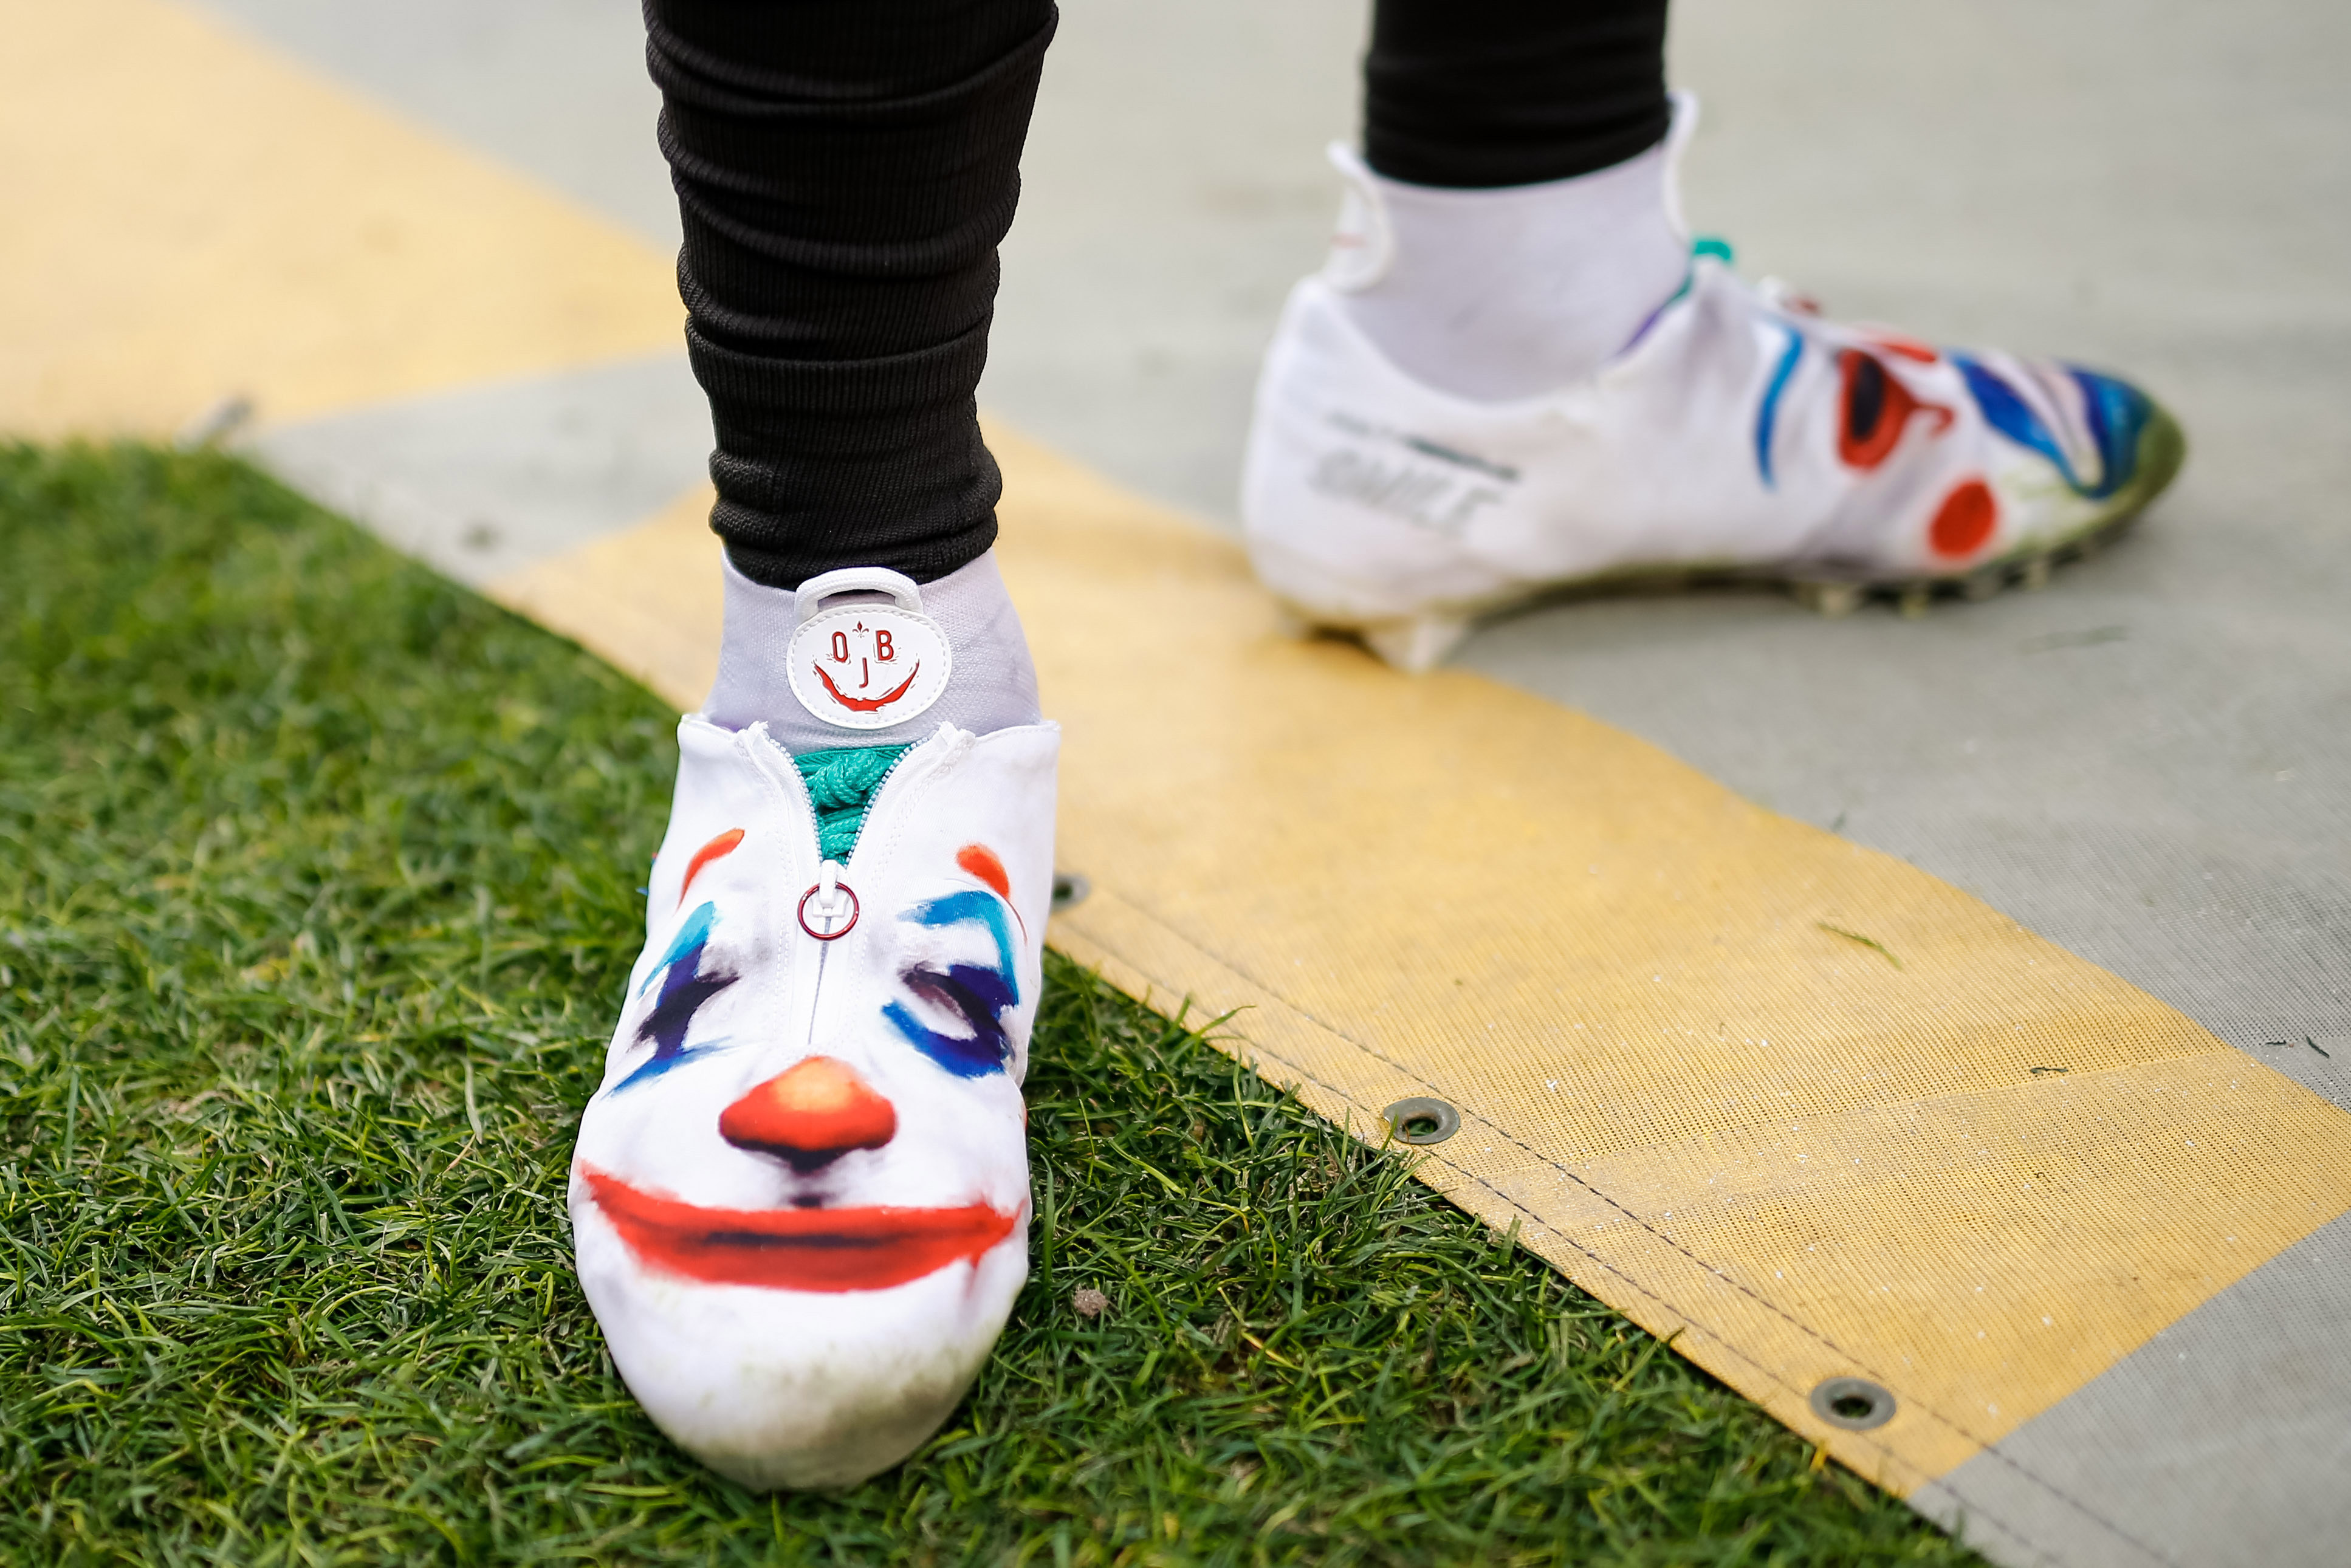 Every Nike Cleat Odell Beckham Jr. Wore During the 2019 NFL Season